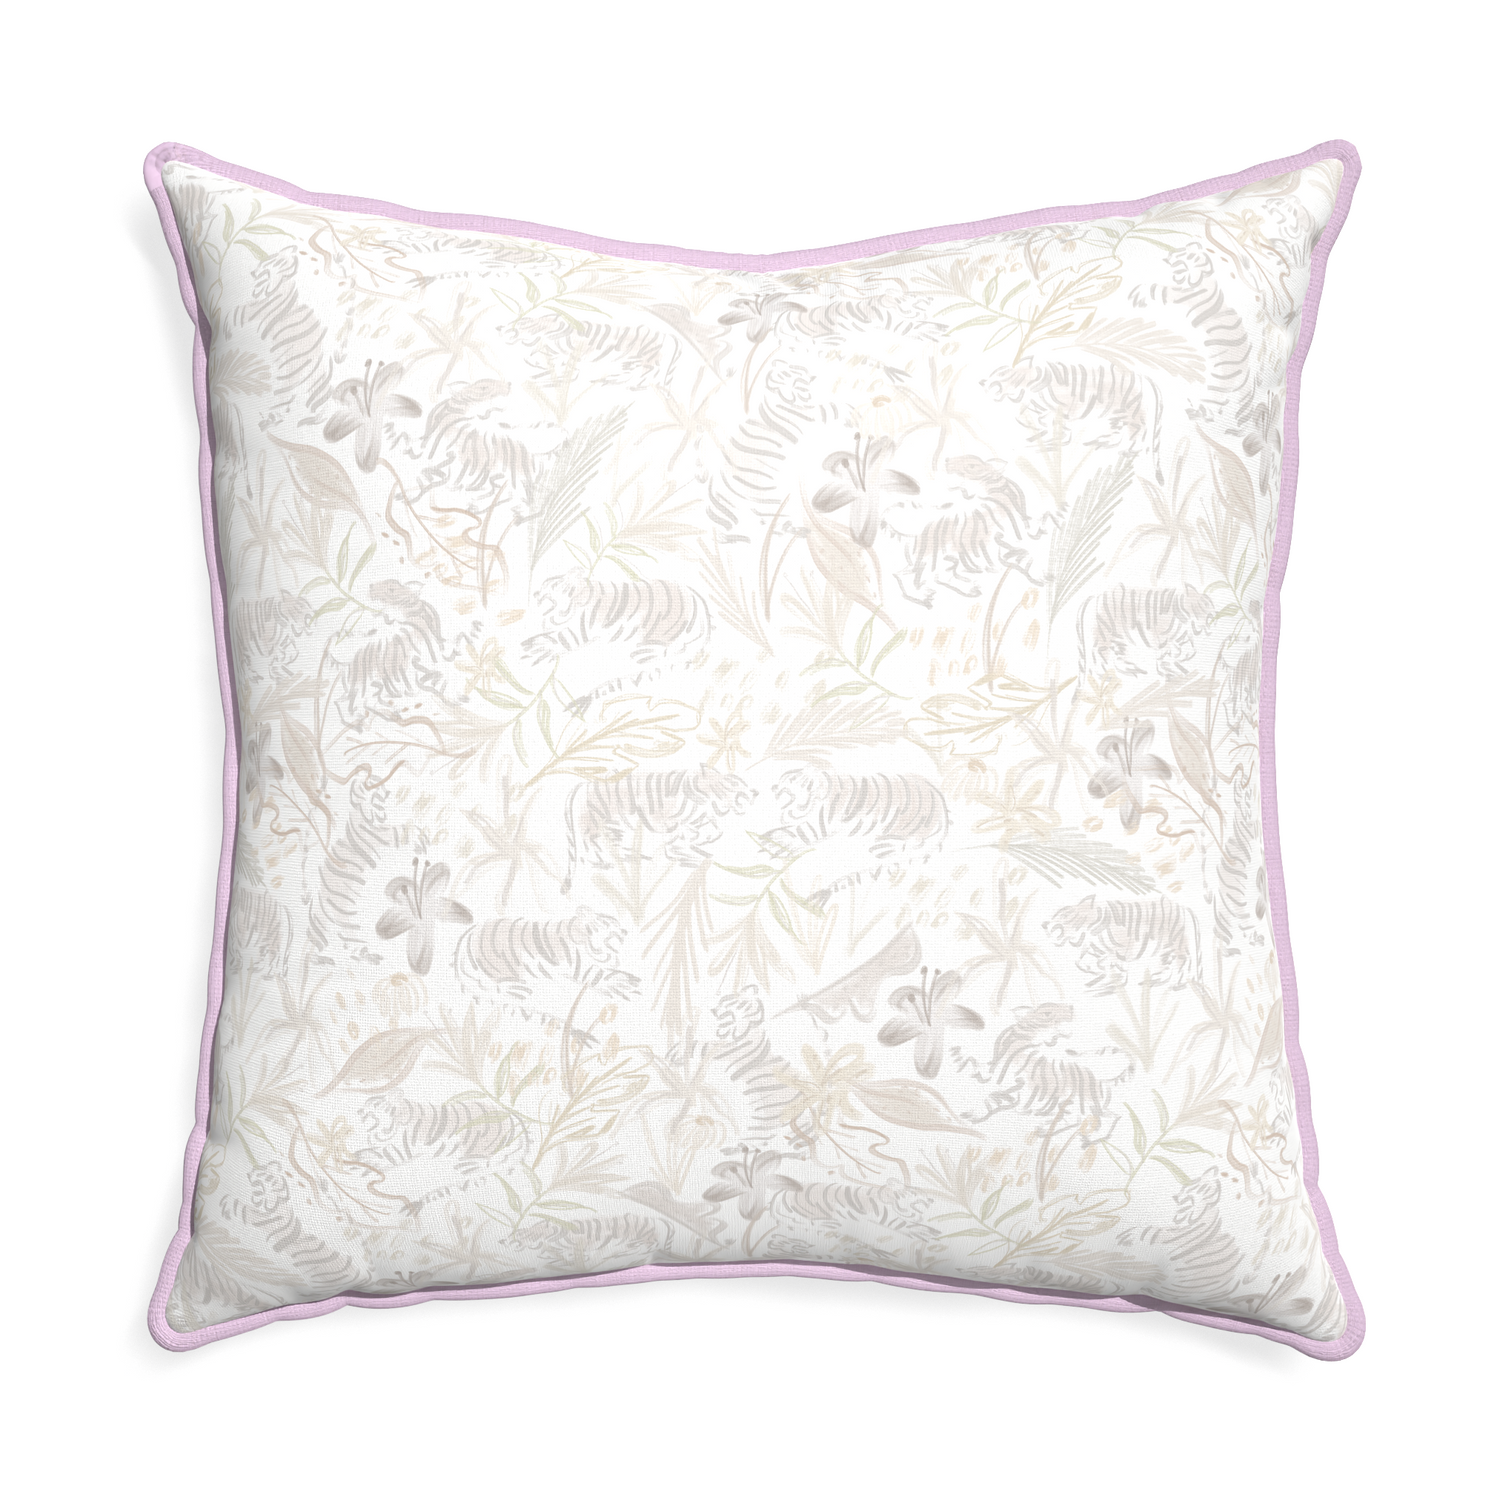 Euro-sham frida sand custom beige chinoiserie tigerpillow with l piping on white background